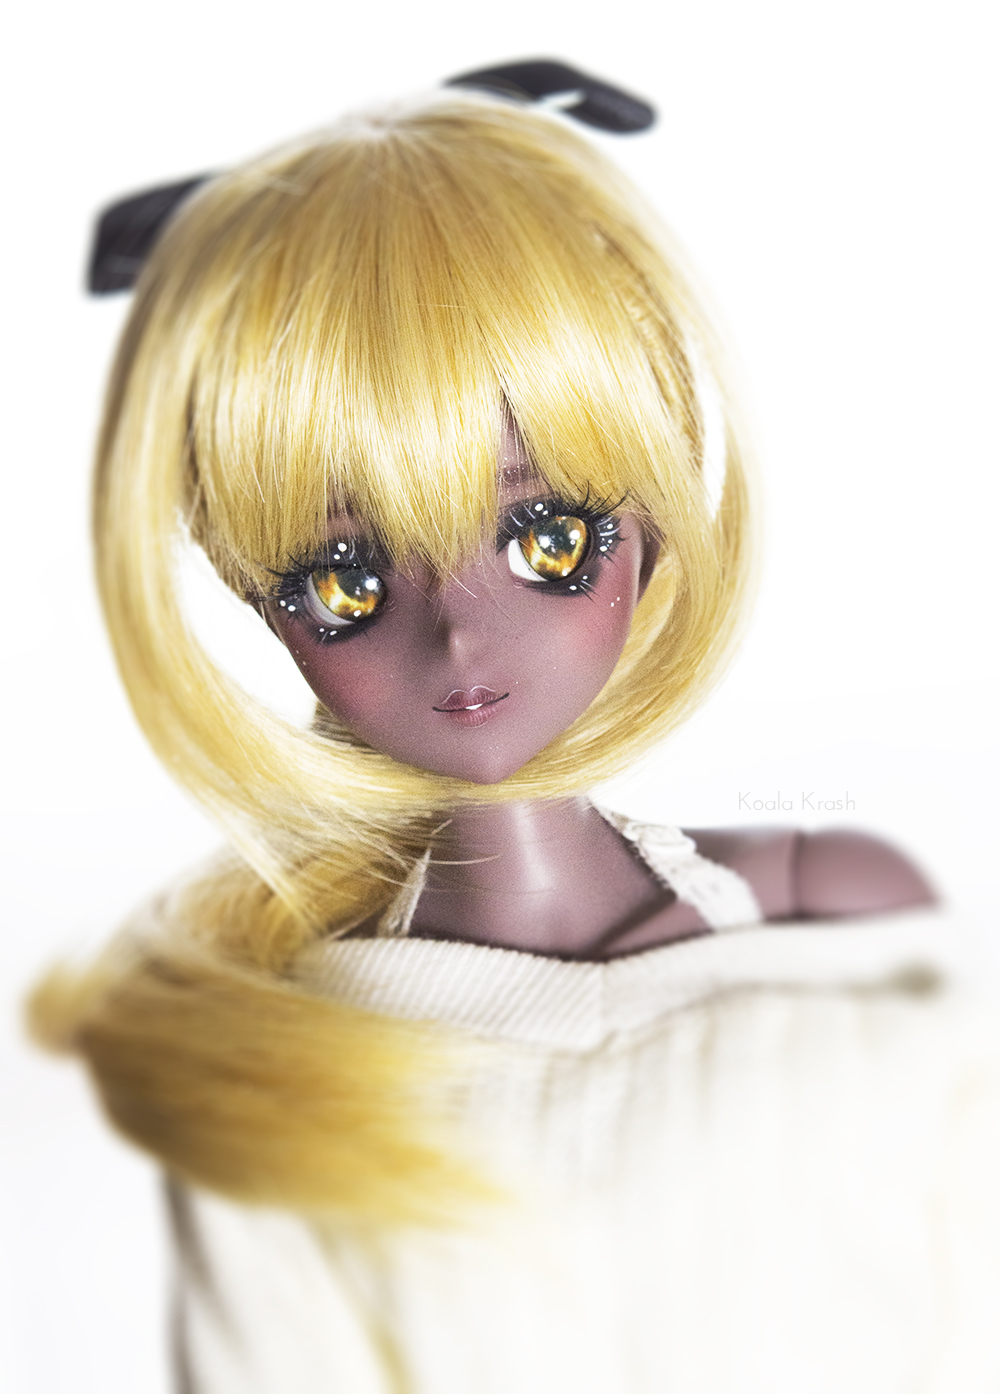 [Dollfie Icon / Dollfie Dream]   ✧* ✧*  Cooking time !  // The Fox Knight  *✧ *✧ - Page 19 48013747671_808b66ca99_o